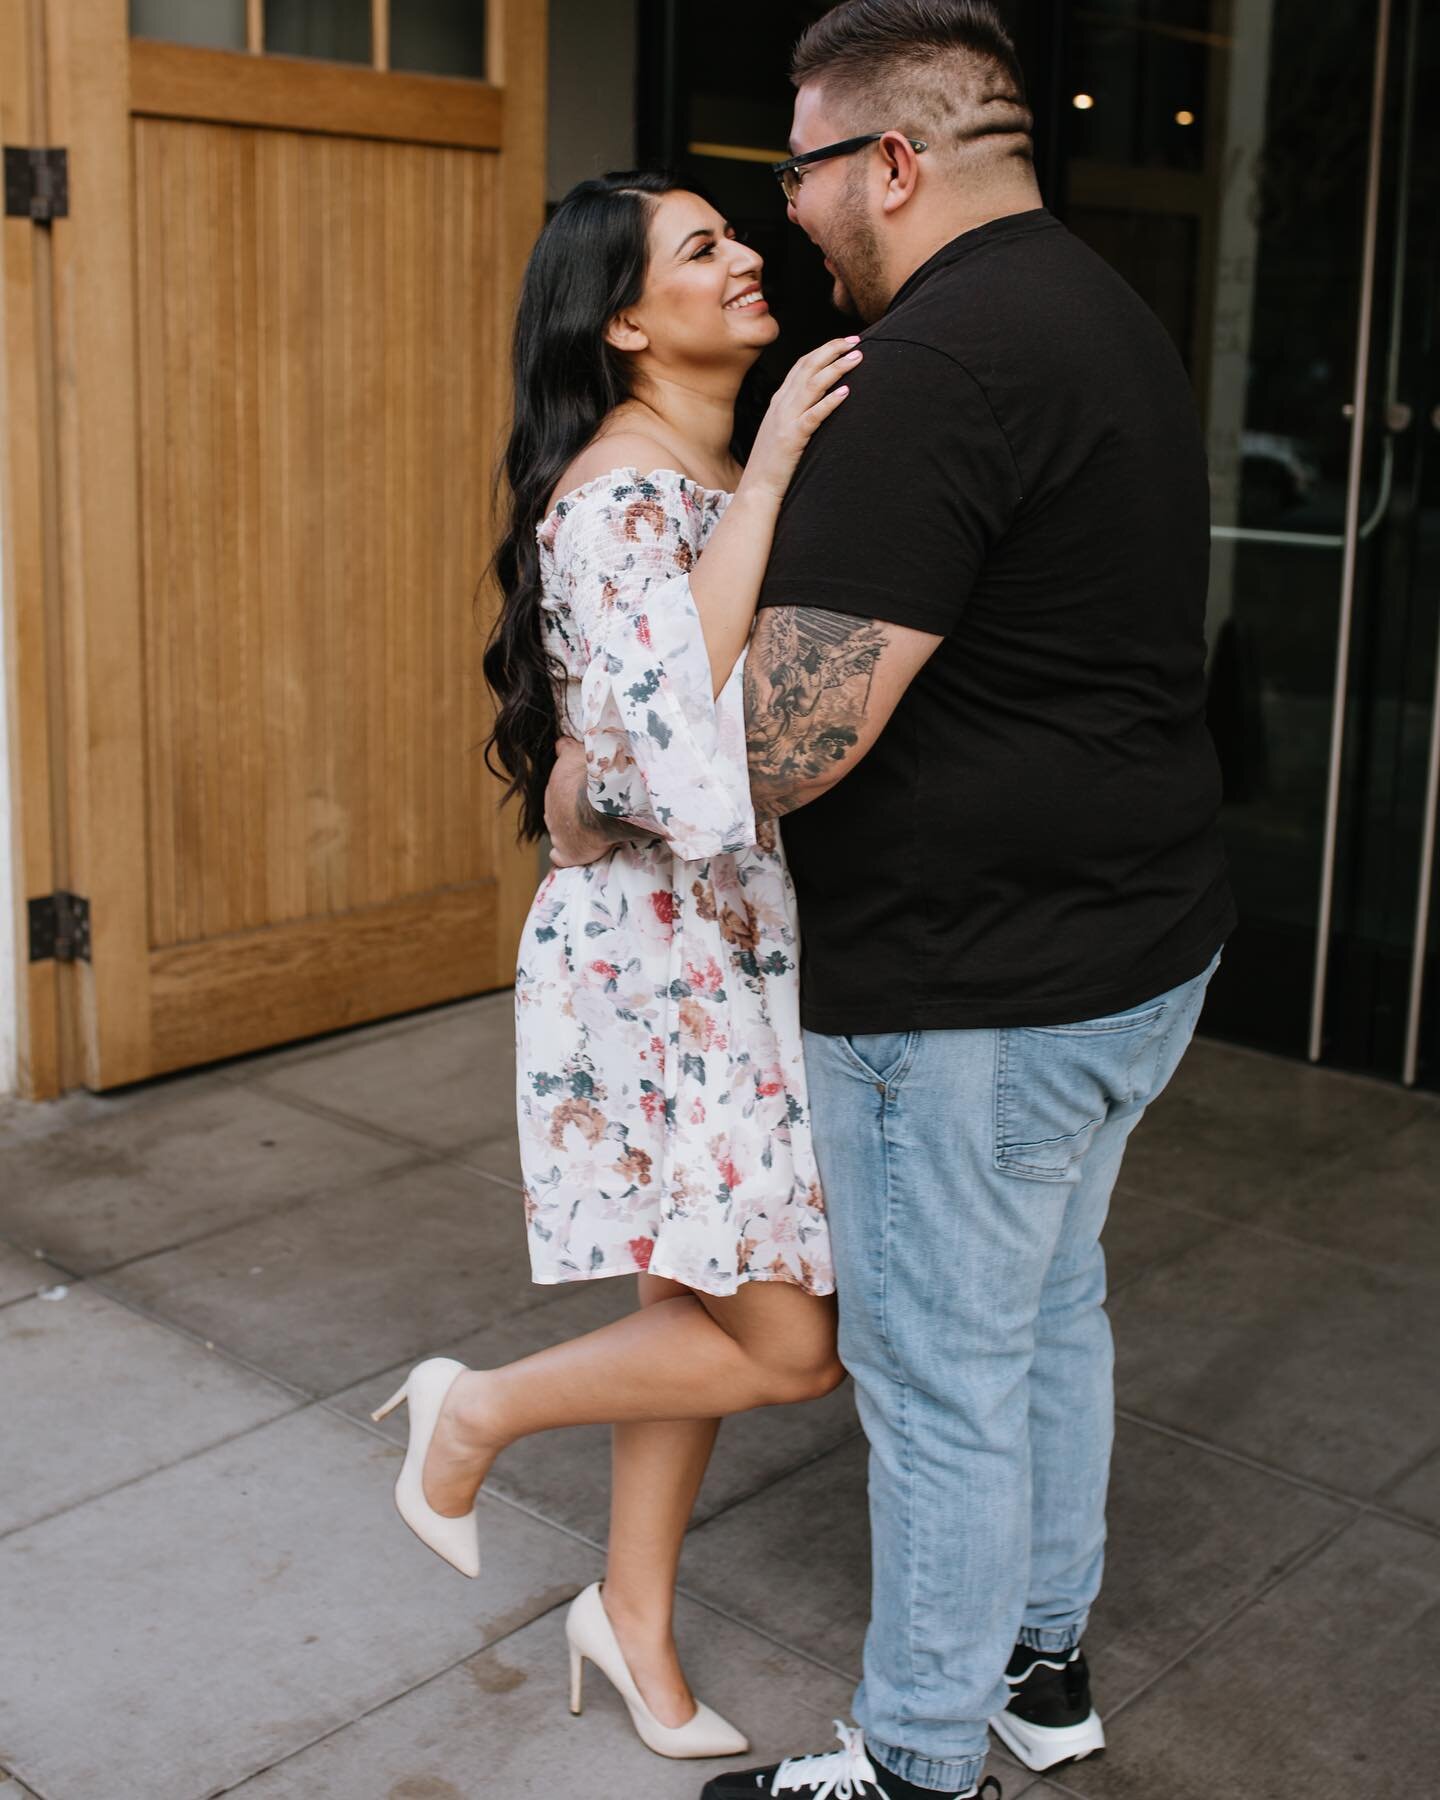 always so hard to narrow down photos to fit here! angie + jerry sweetness downtown for their engagement photos. check your inbox guys!! 😘